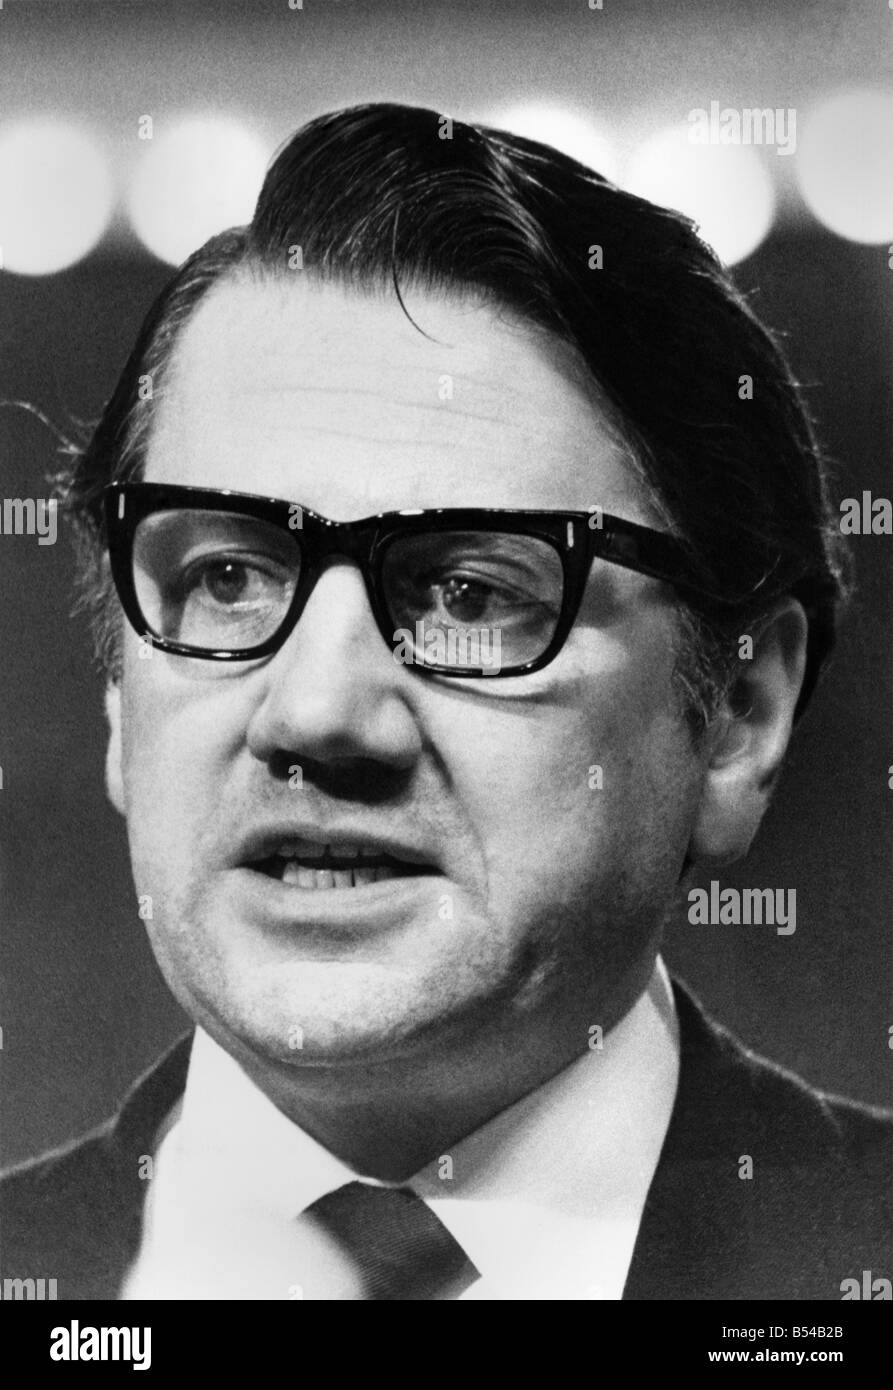 Norman Atkinson, MP for Tottenham, photographed during the 1973 Labour Party conference at Blackpool. October 1973 ;P017077 Stock Photo